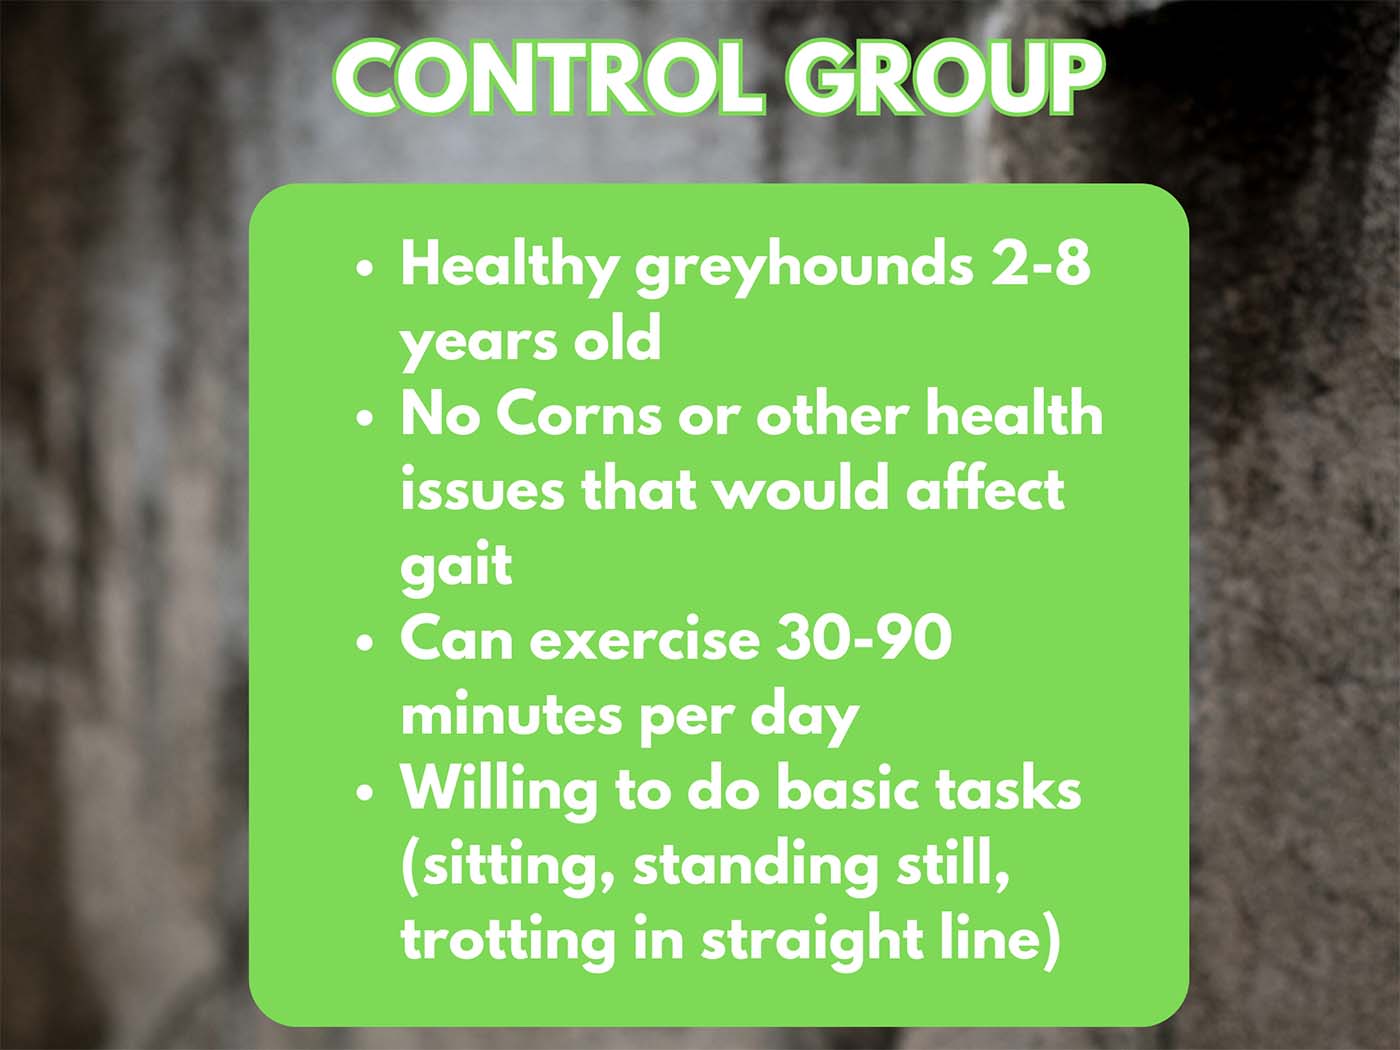 University of Liverpool Corn Symposium 2022 control group requirements